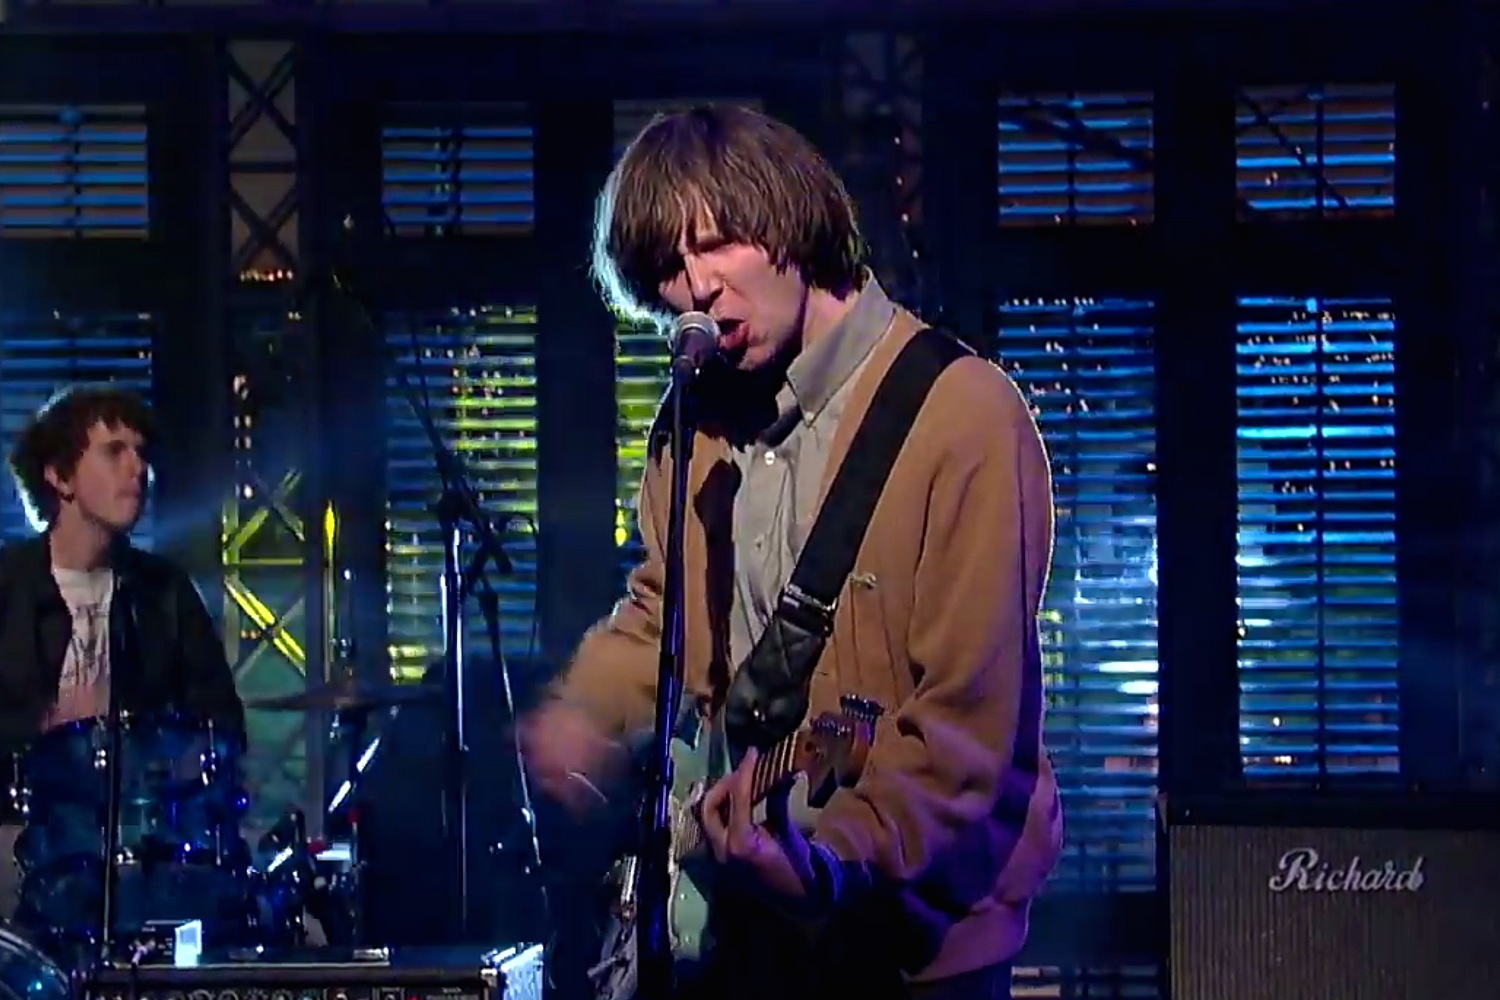 Watch Parquet Courts bring ‘Bodies Made Of’ to Letterman